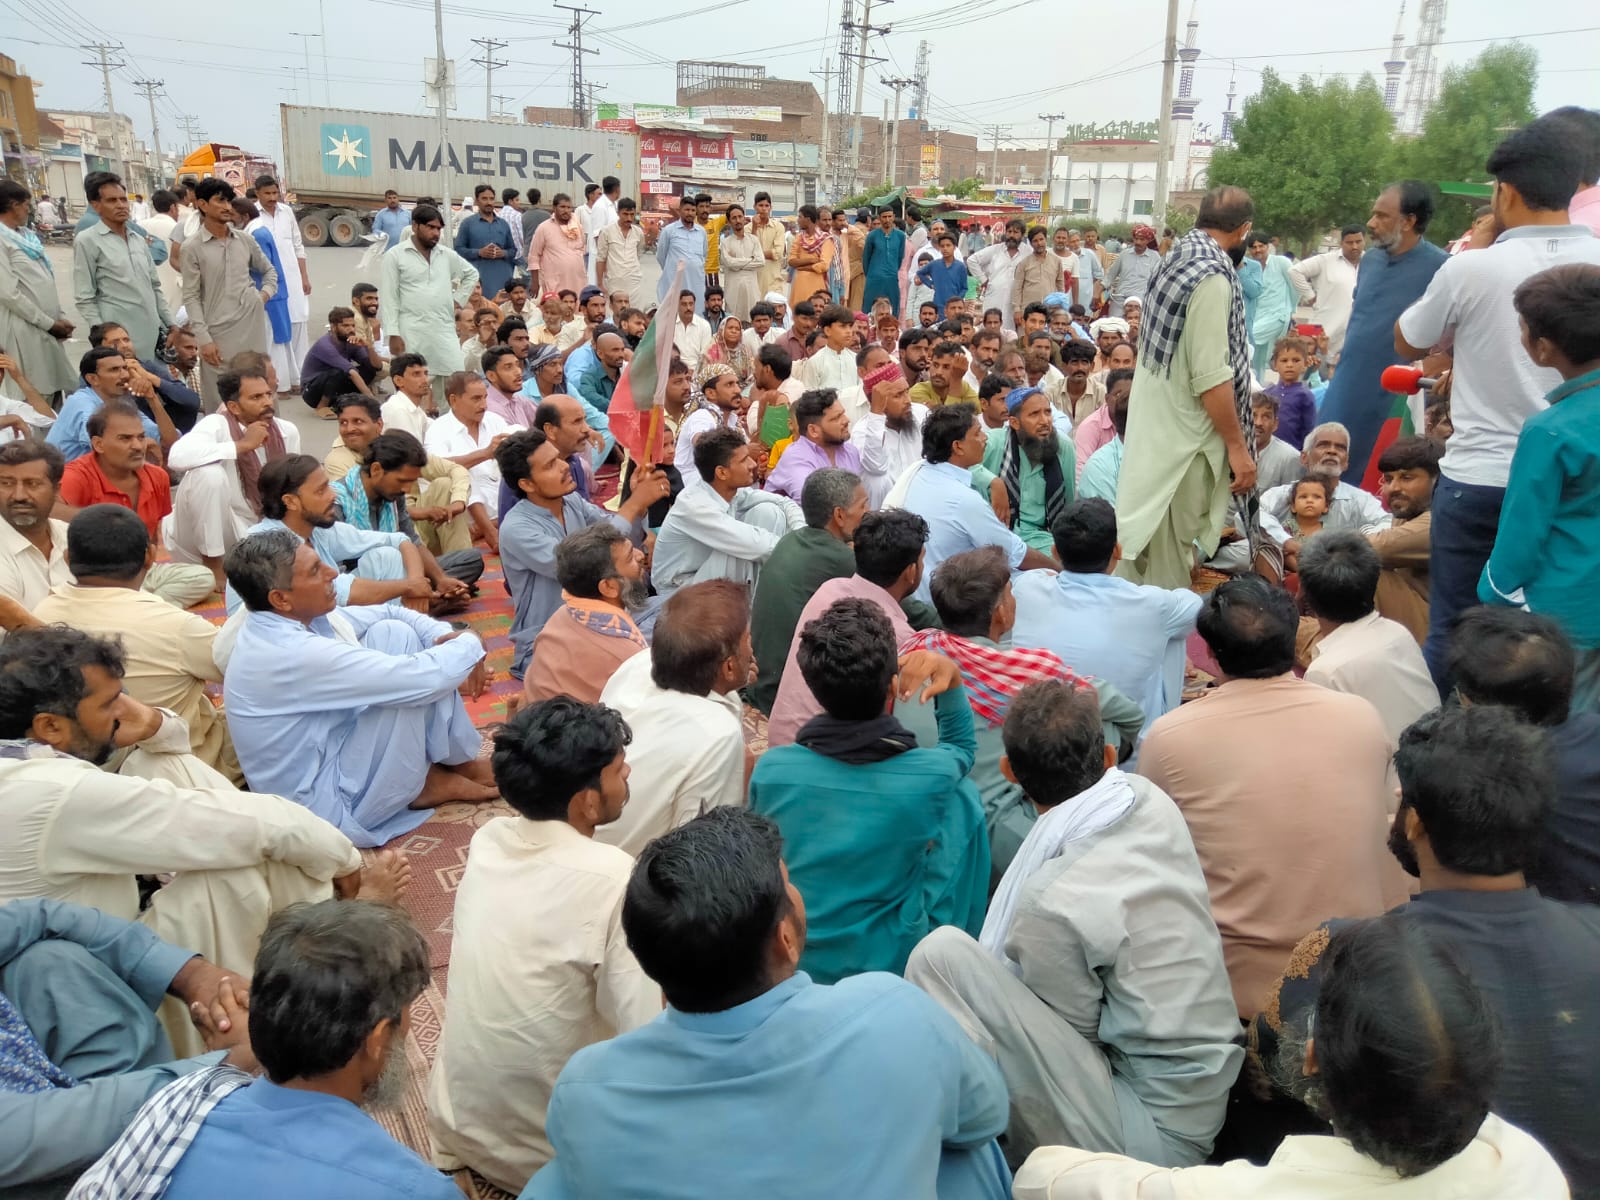 LQM-Pattan is Protesting for Increase in Daily wages as per law and provide social security card and EOBI to labour 